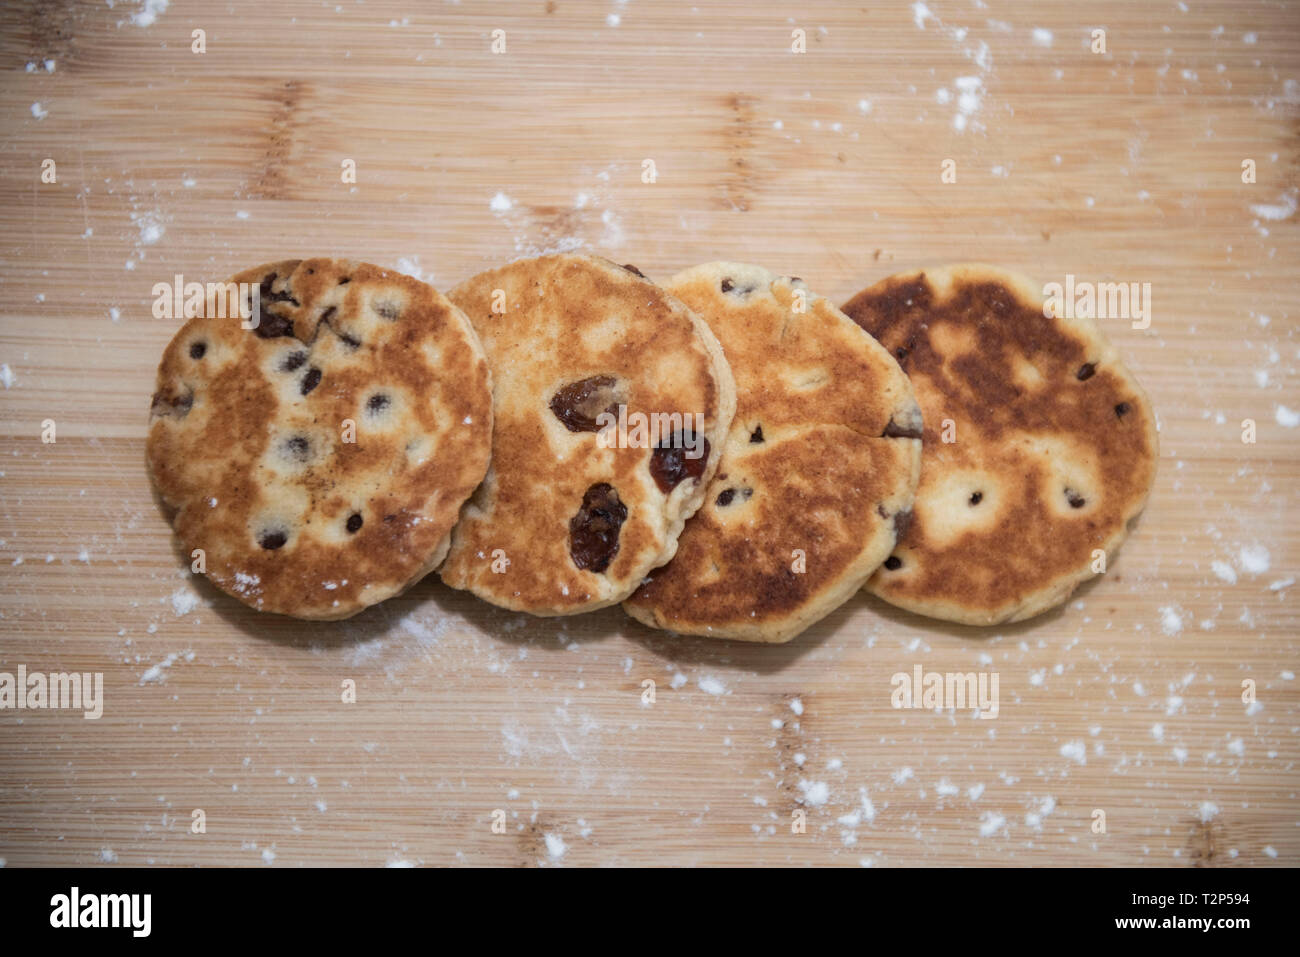 Cardiff, Wales, United Kingdom. March 27 2019. Studio photo of Welsh Cakes. Kira Butters Stock Photo